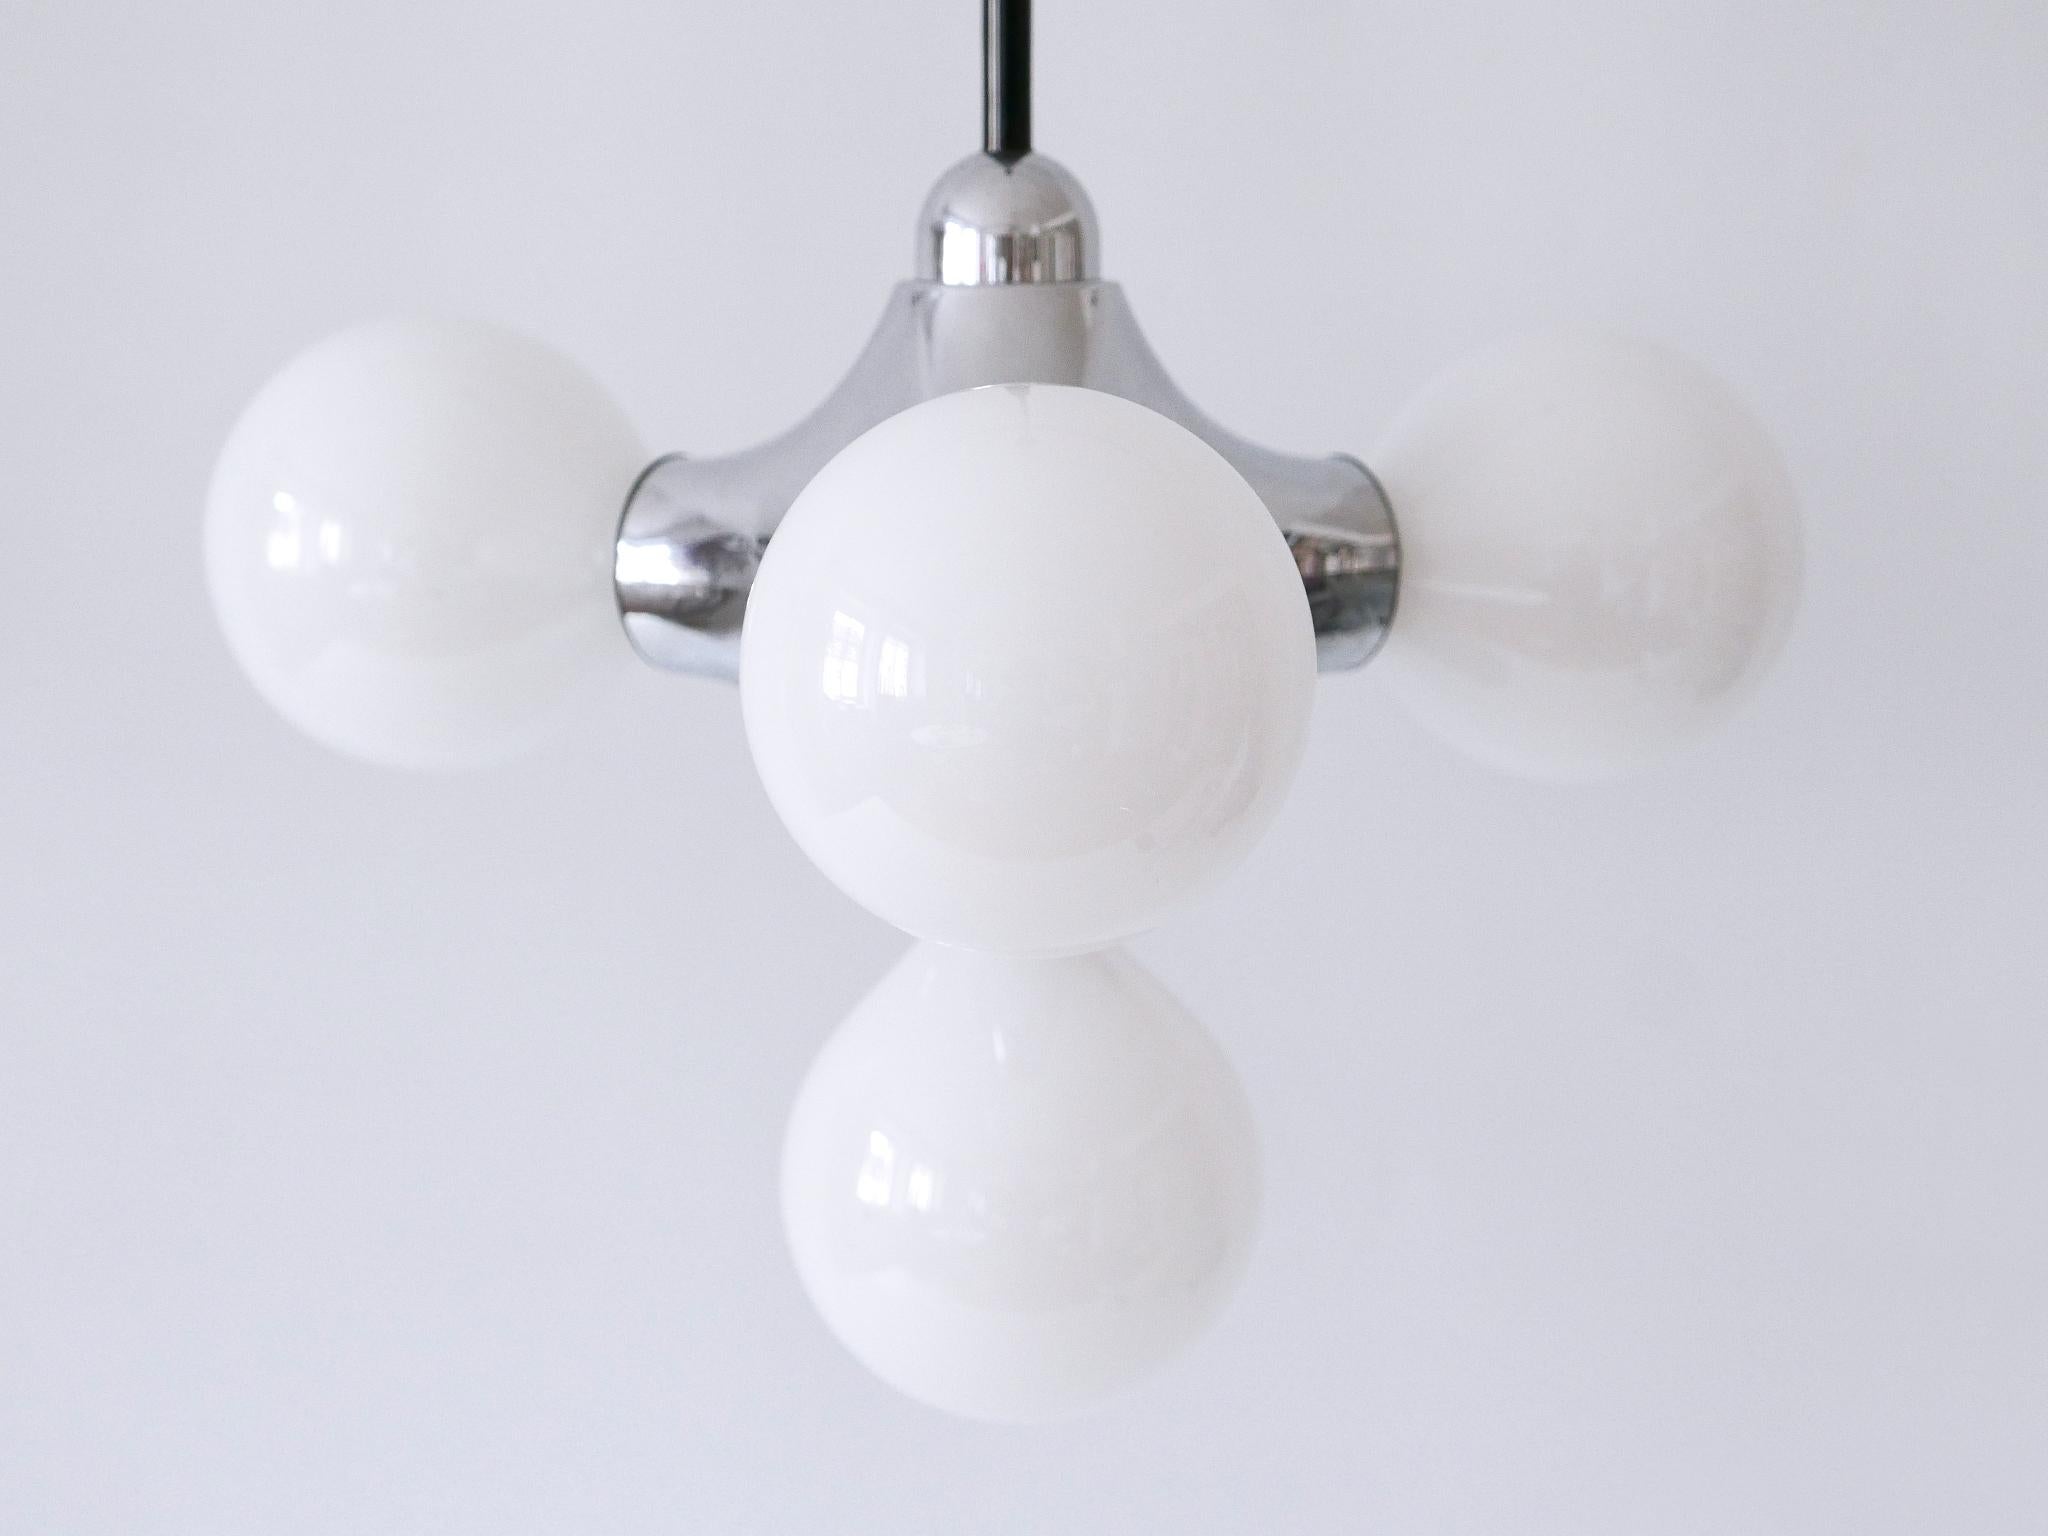 Rare Mid-Century Modern Atomic Pendant Lamp by Gebrüder Cosack Germany 1970s For Sale 7